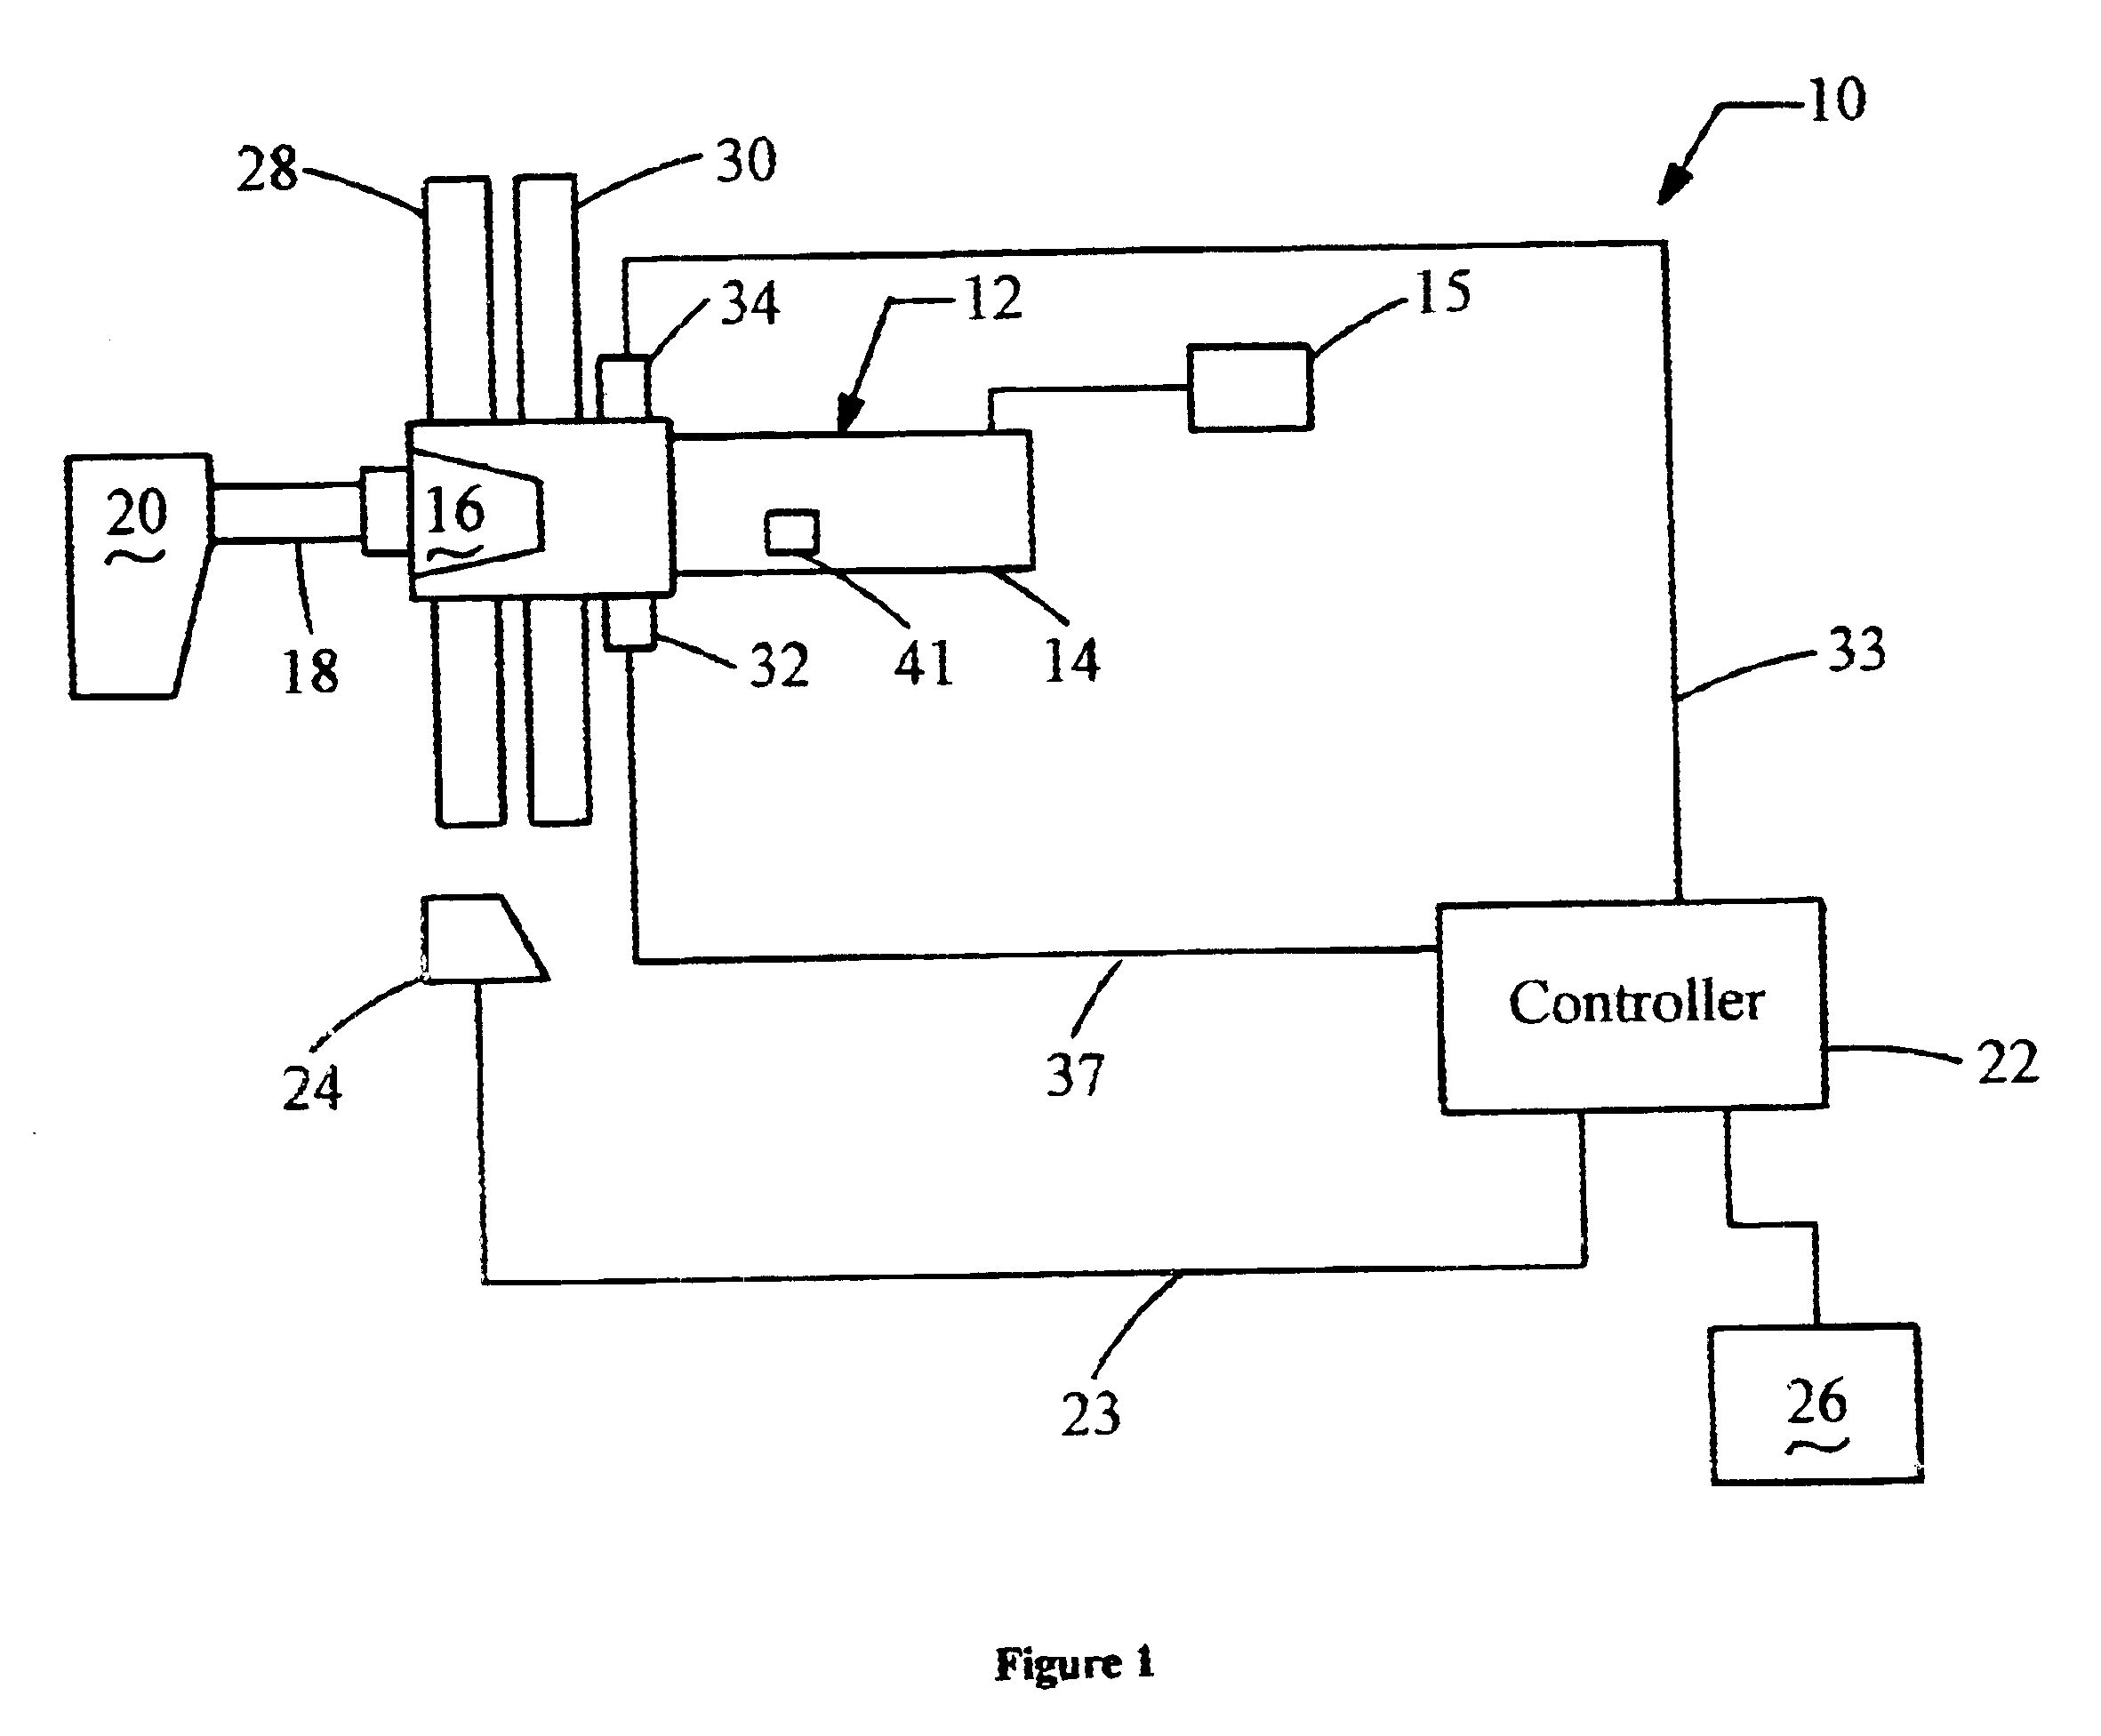 Method and apparatus for balancing